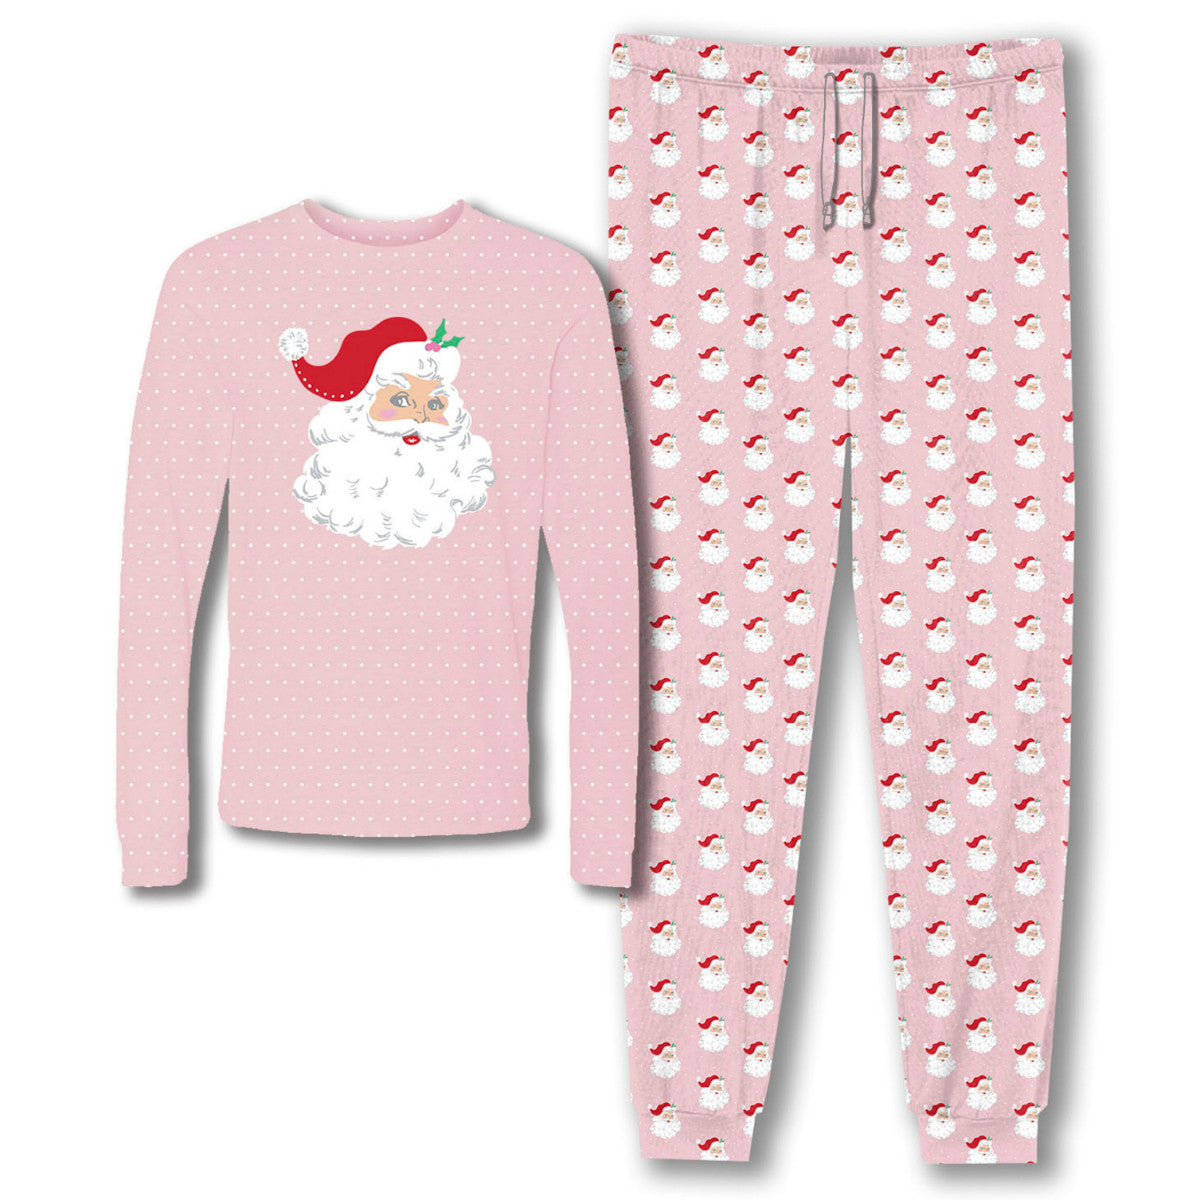 Here Comes Santa Claus Jogger Jammie Set (Pink) Kids